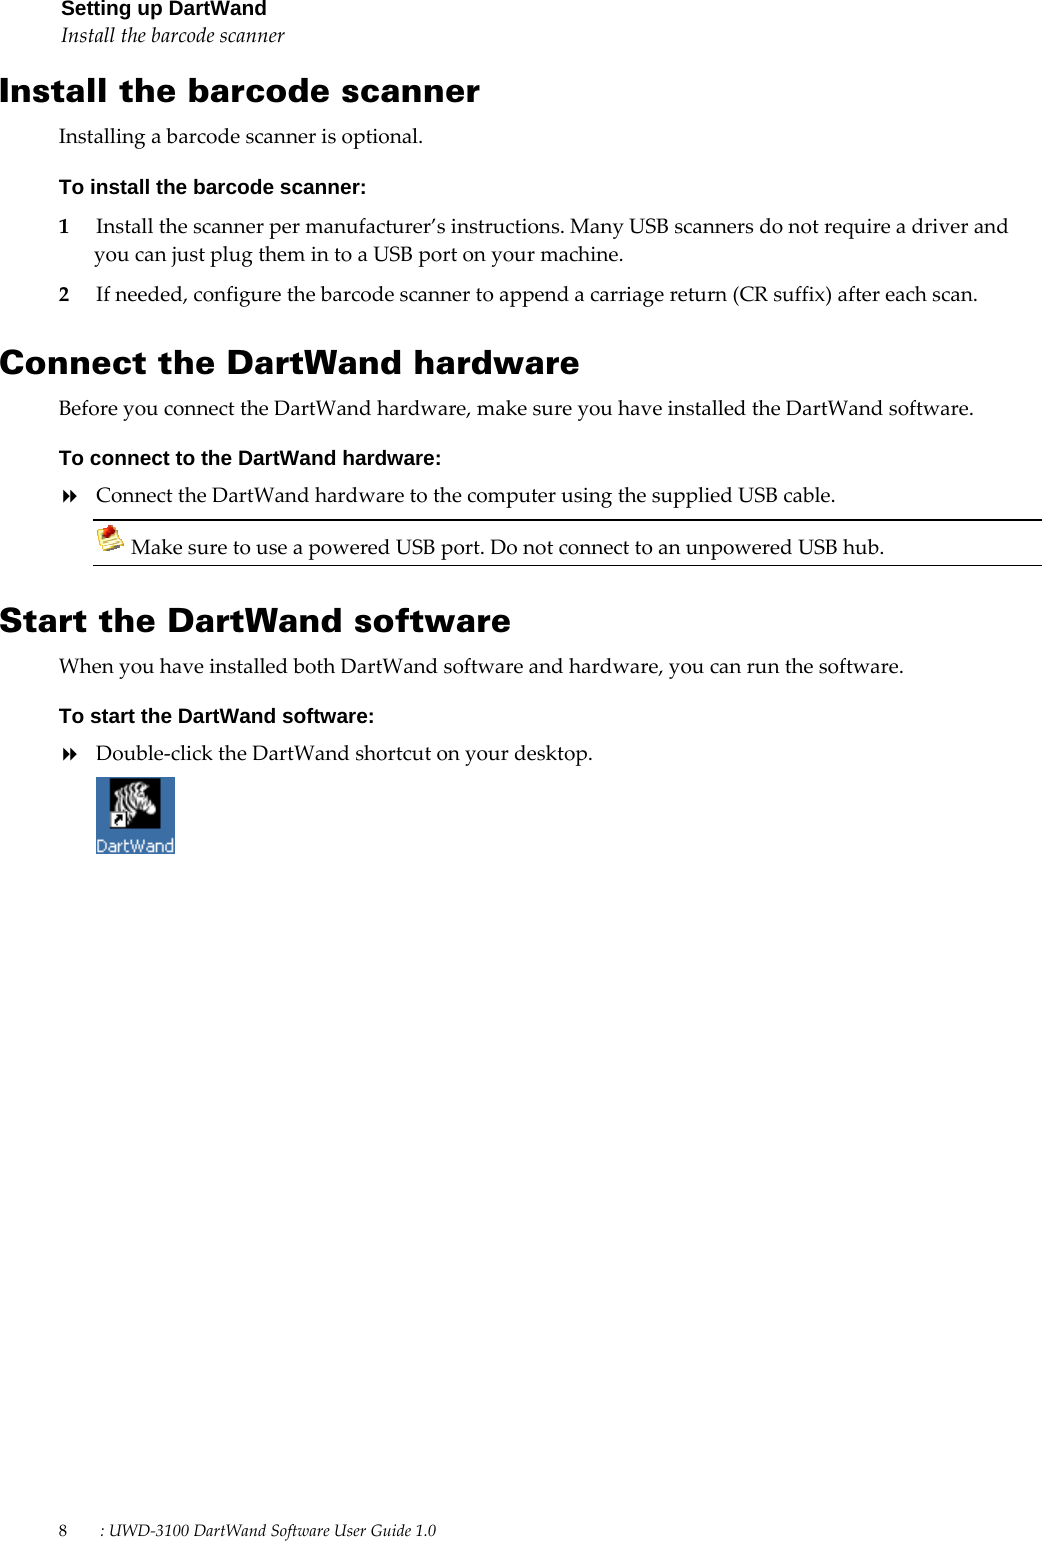 8        : UWD-3100 DartWand Software User Guide 1.0  Setting up DartWand Install the barcode scanner  Install the barcode scanner Installing a barcode scanner is optional. To install the barcode scanner: 1 Install the scanner per manufacturer’s instructions. Many USB scanners do not require a driver and you can just plug them in to a USB port on your machine.  2 If needed, configure the barcode scanner to append a carriage return (CR suffix) after each scan.  Connect the DartWand hardware Before you connect the DartWand hardware, make sure you have installed the DartWand software. To connect to the DartWand hardware:  Connect the DartWand hardware to the computer using the supplied USB cable.  Make sure to use a powered USB port. Do not connect to an unpowered USB hub.  Start the DartWand software When you have installed both DartWand software and hardware, you can run the software. To start the DartWand software:  Double-click the DartWand shortcut on your desktop.   